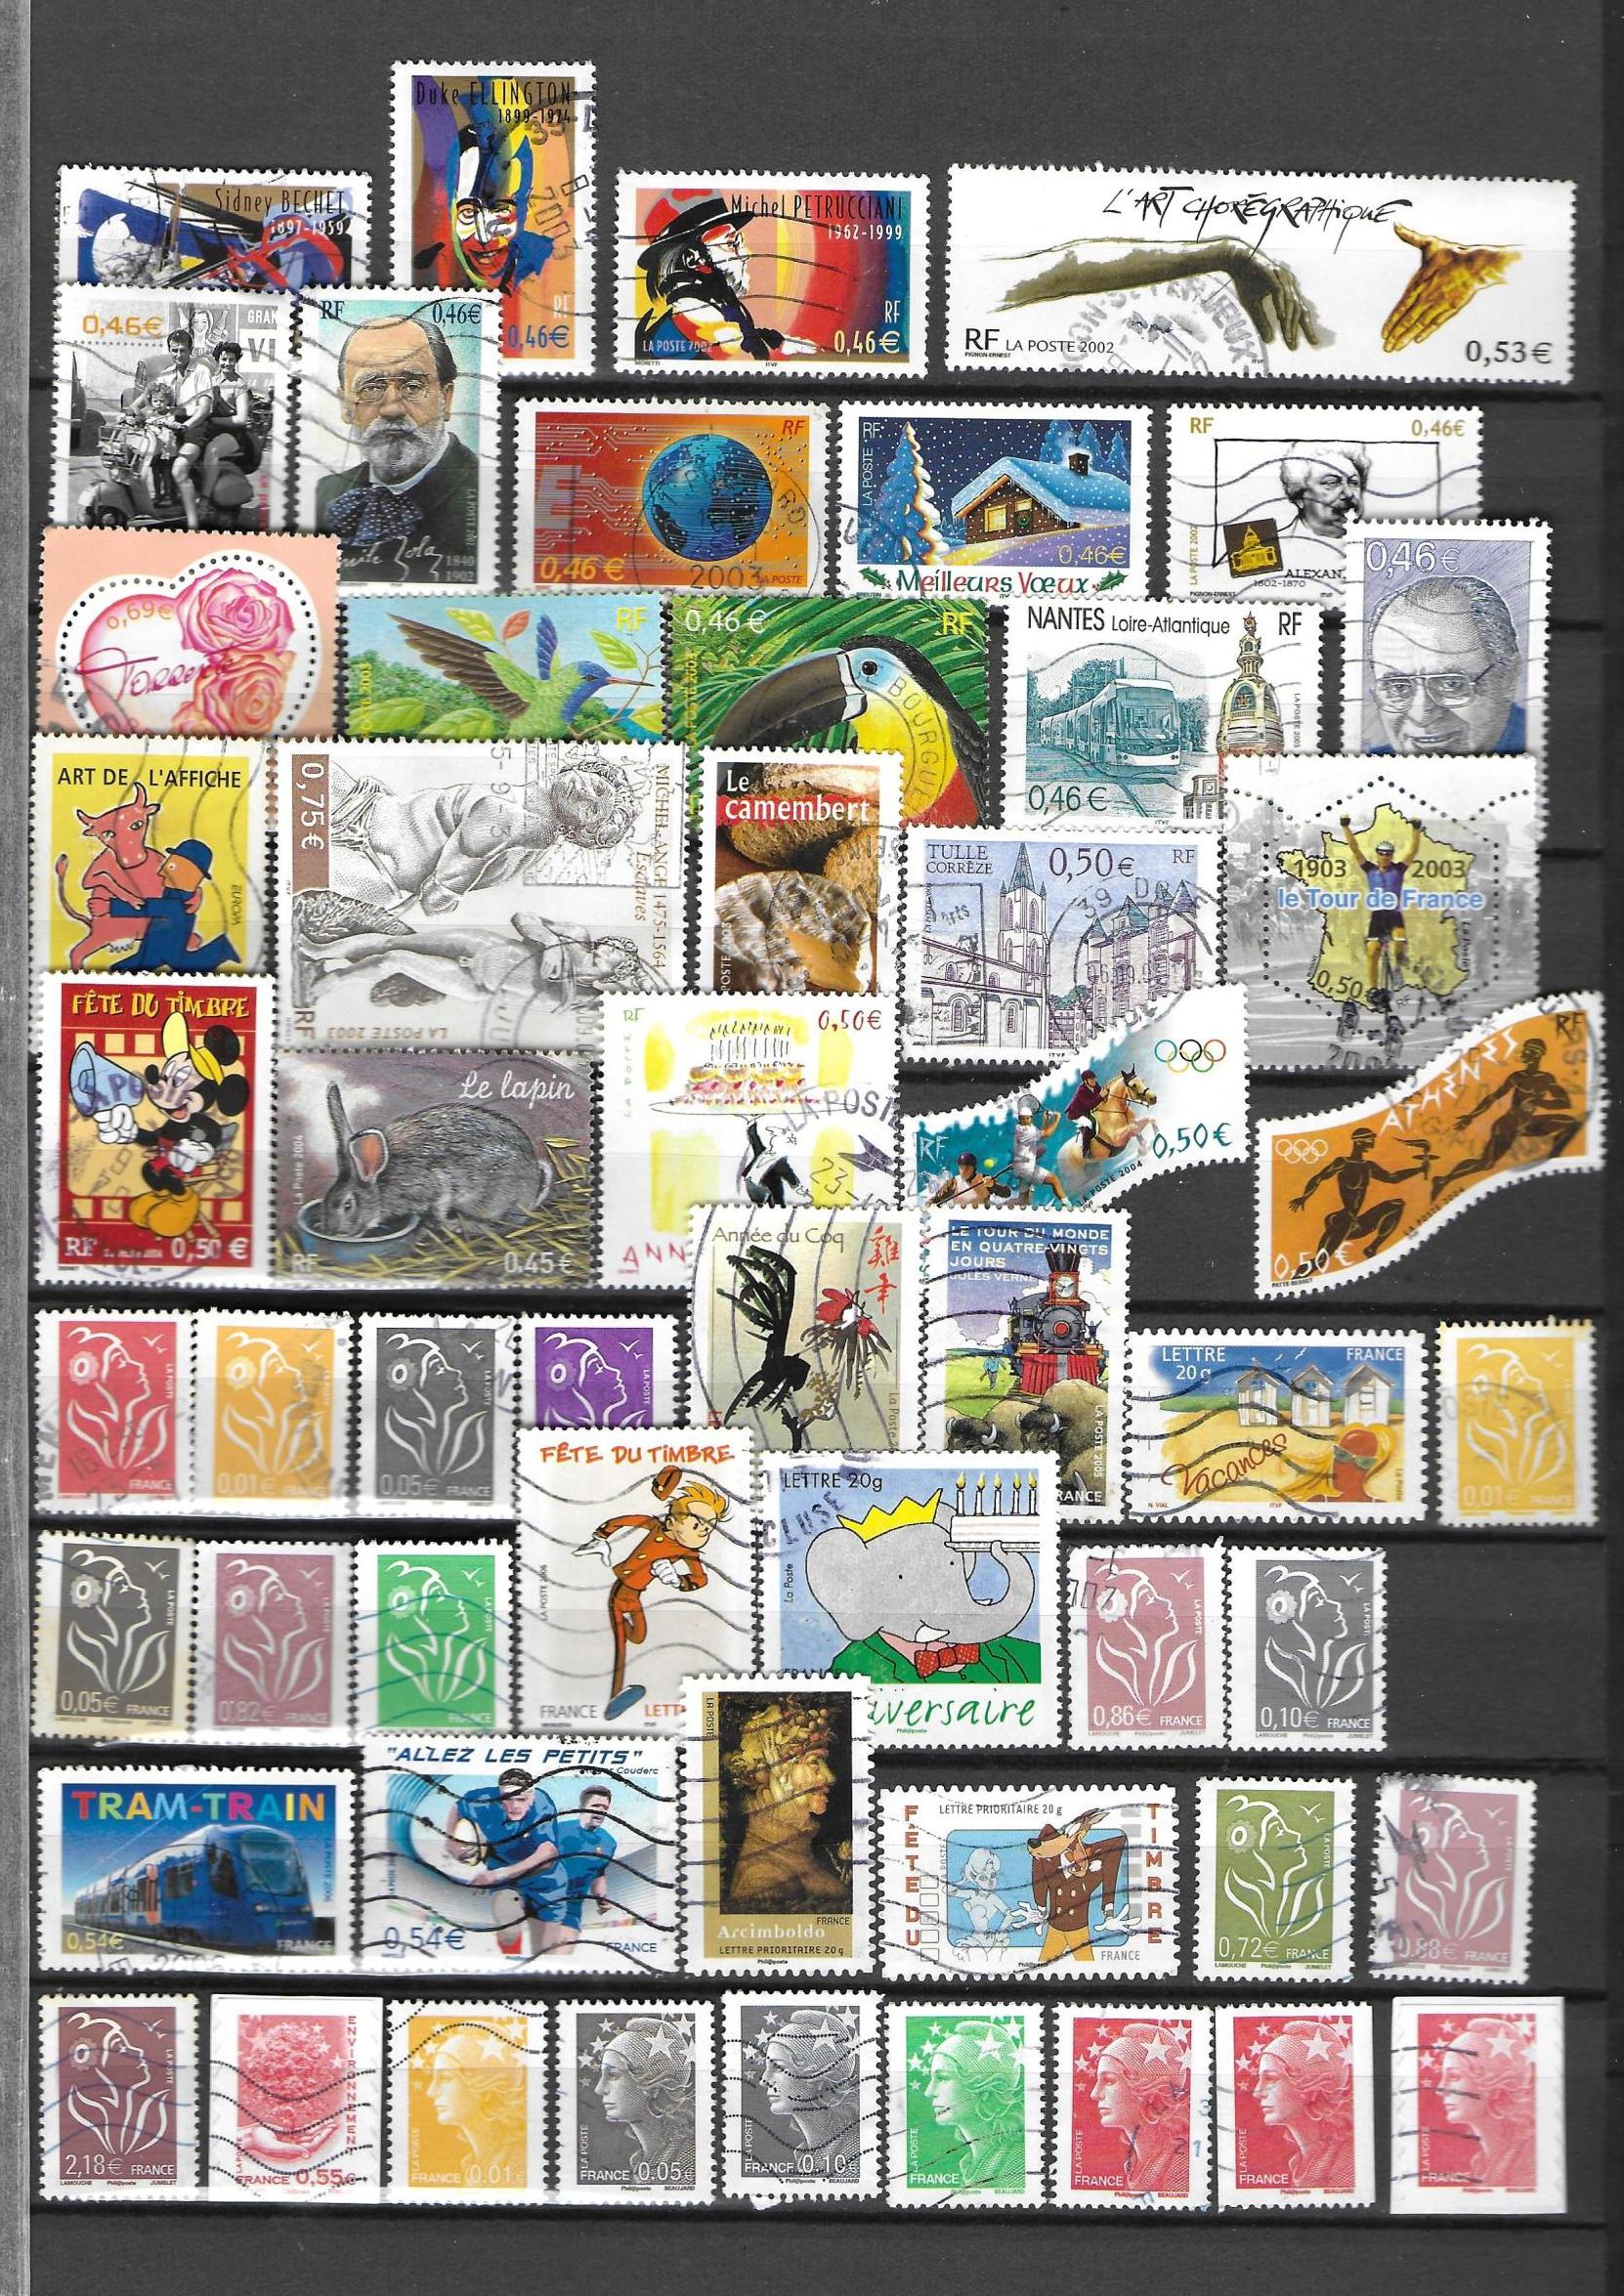 Timbres France 9 - Copie.jpg